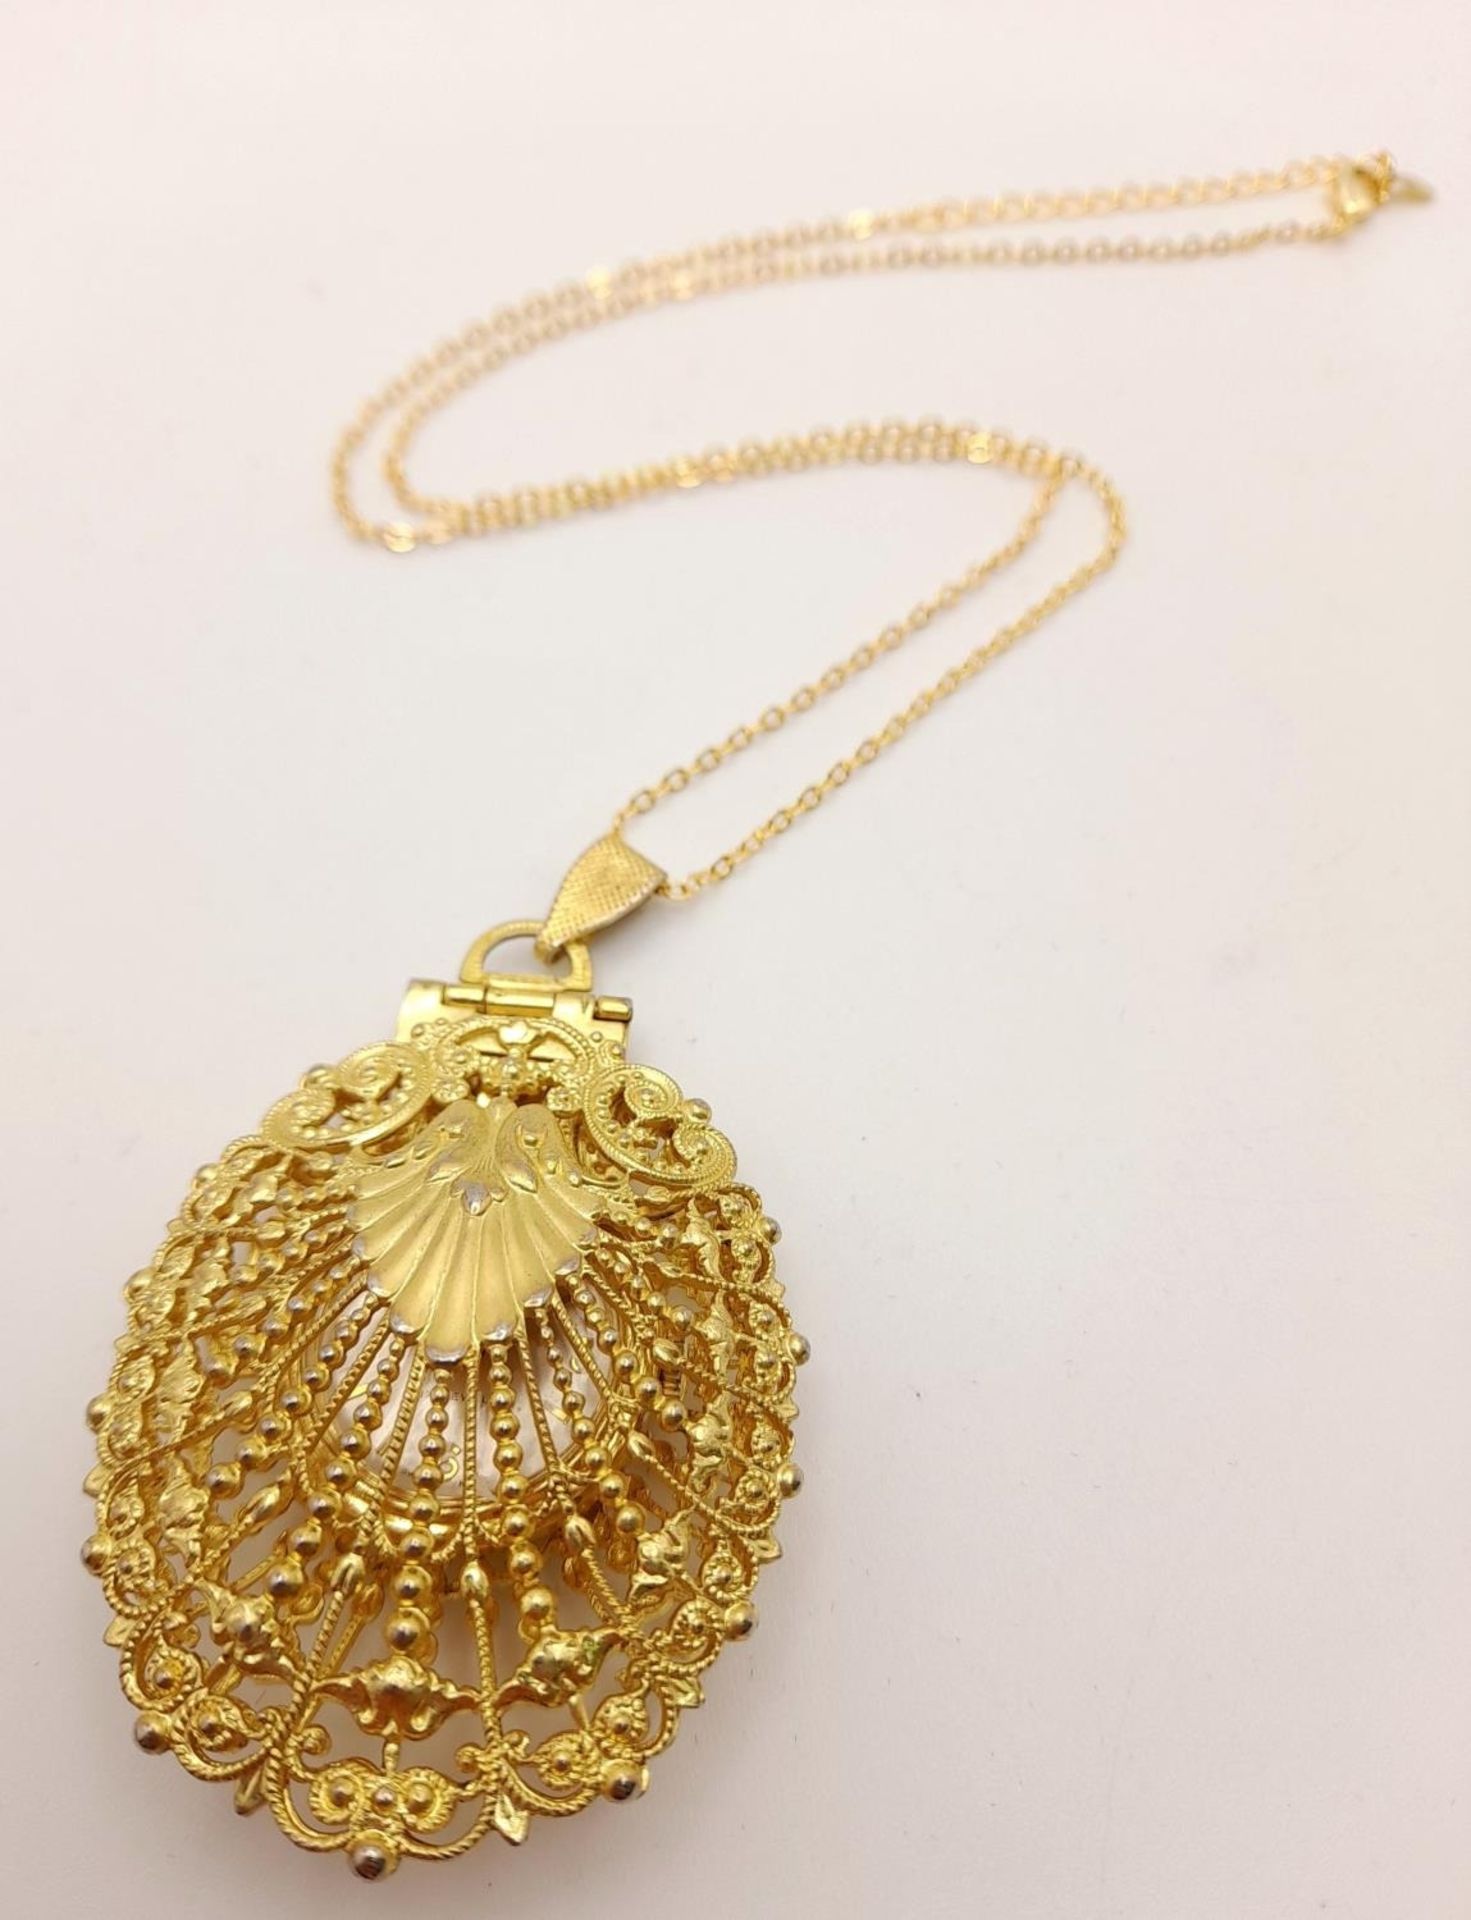 A vintage, sterling silver and 18 K yellow gold-plated chain necklace with an intricate filigree - Image 2 of 8